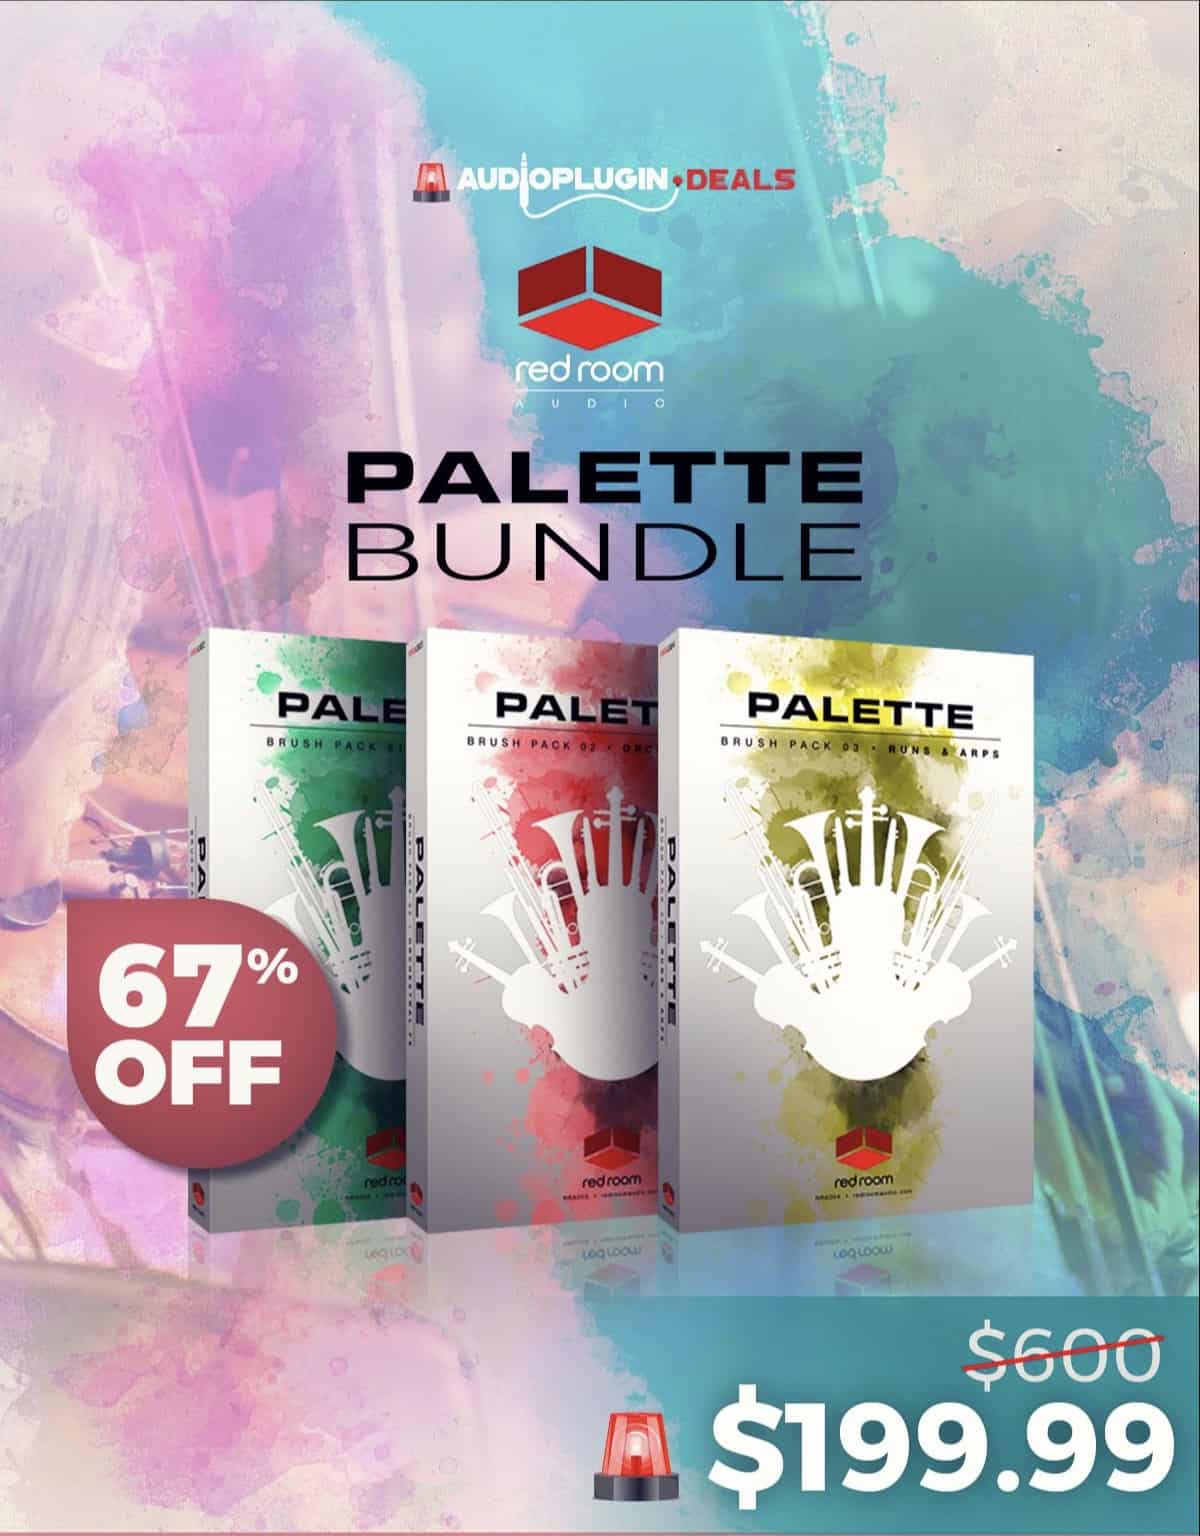 67% OFF PALETTE BUNDLE BY RED ROOM AUDIO